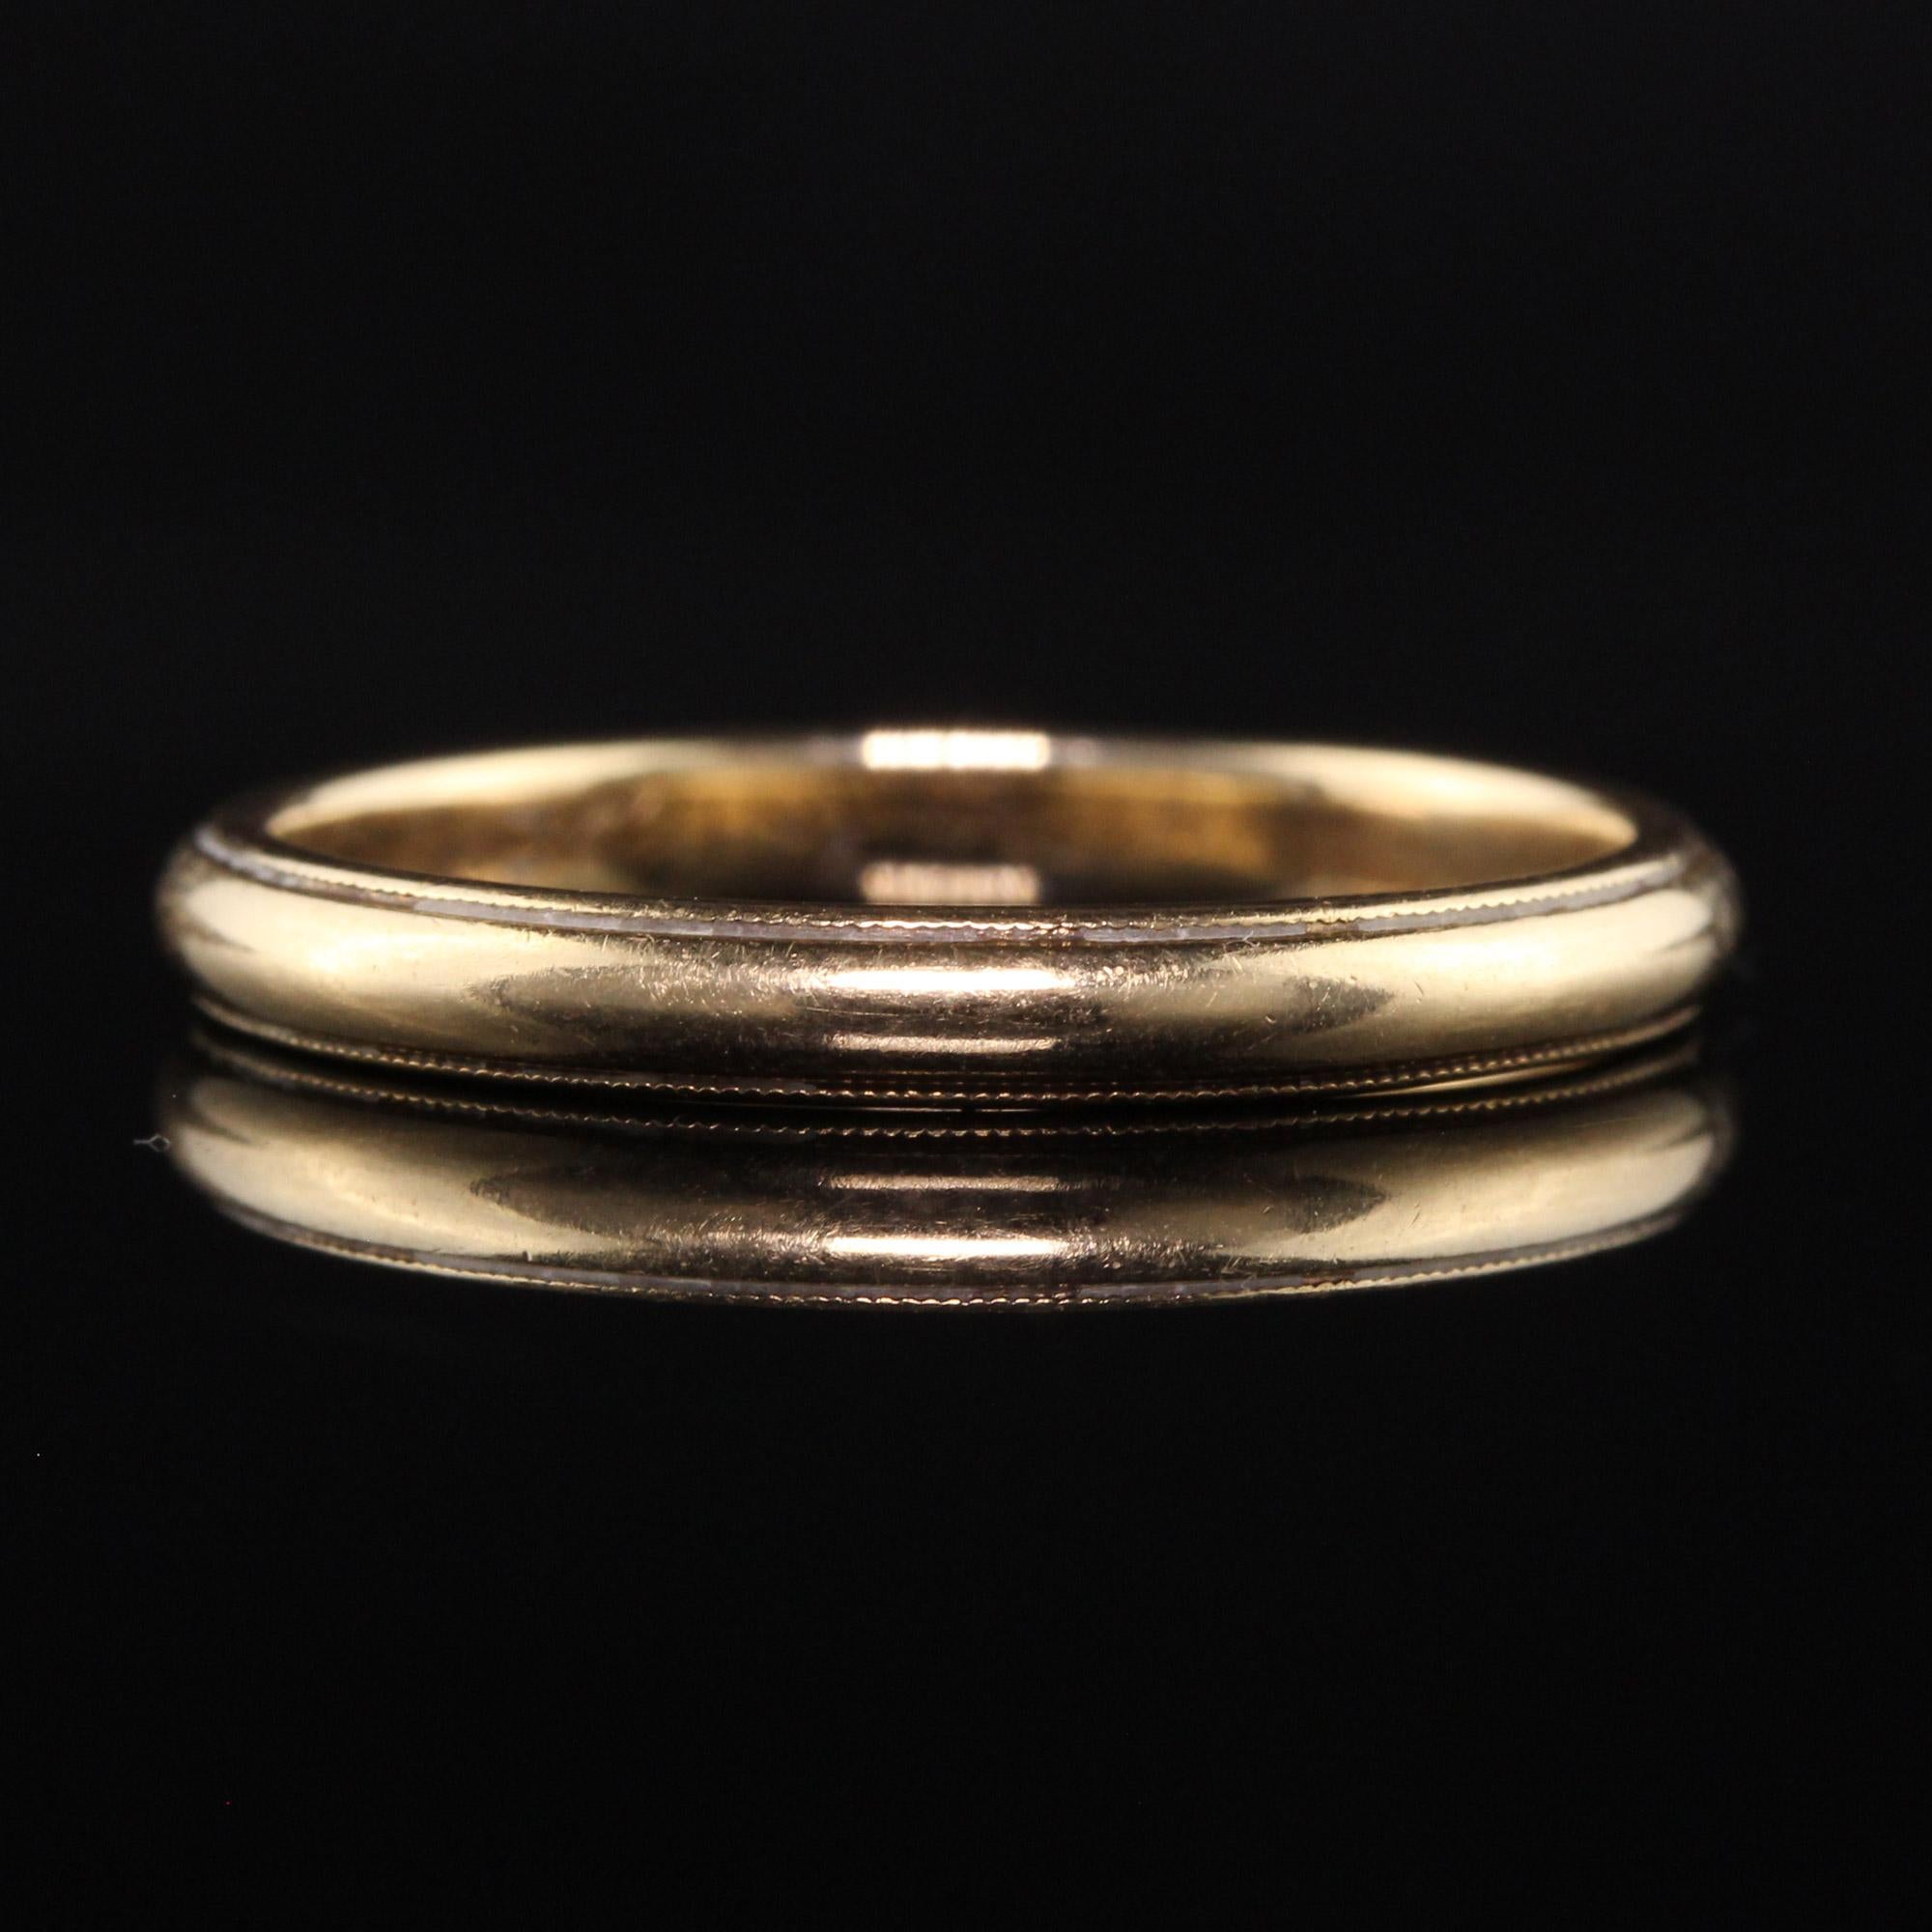 Antique Art Deco 14K Yellow Gold Classic Engraved Wedding Band In Good Condition For Sale In Great Neck, NY